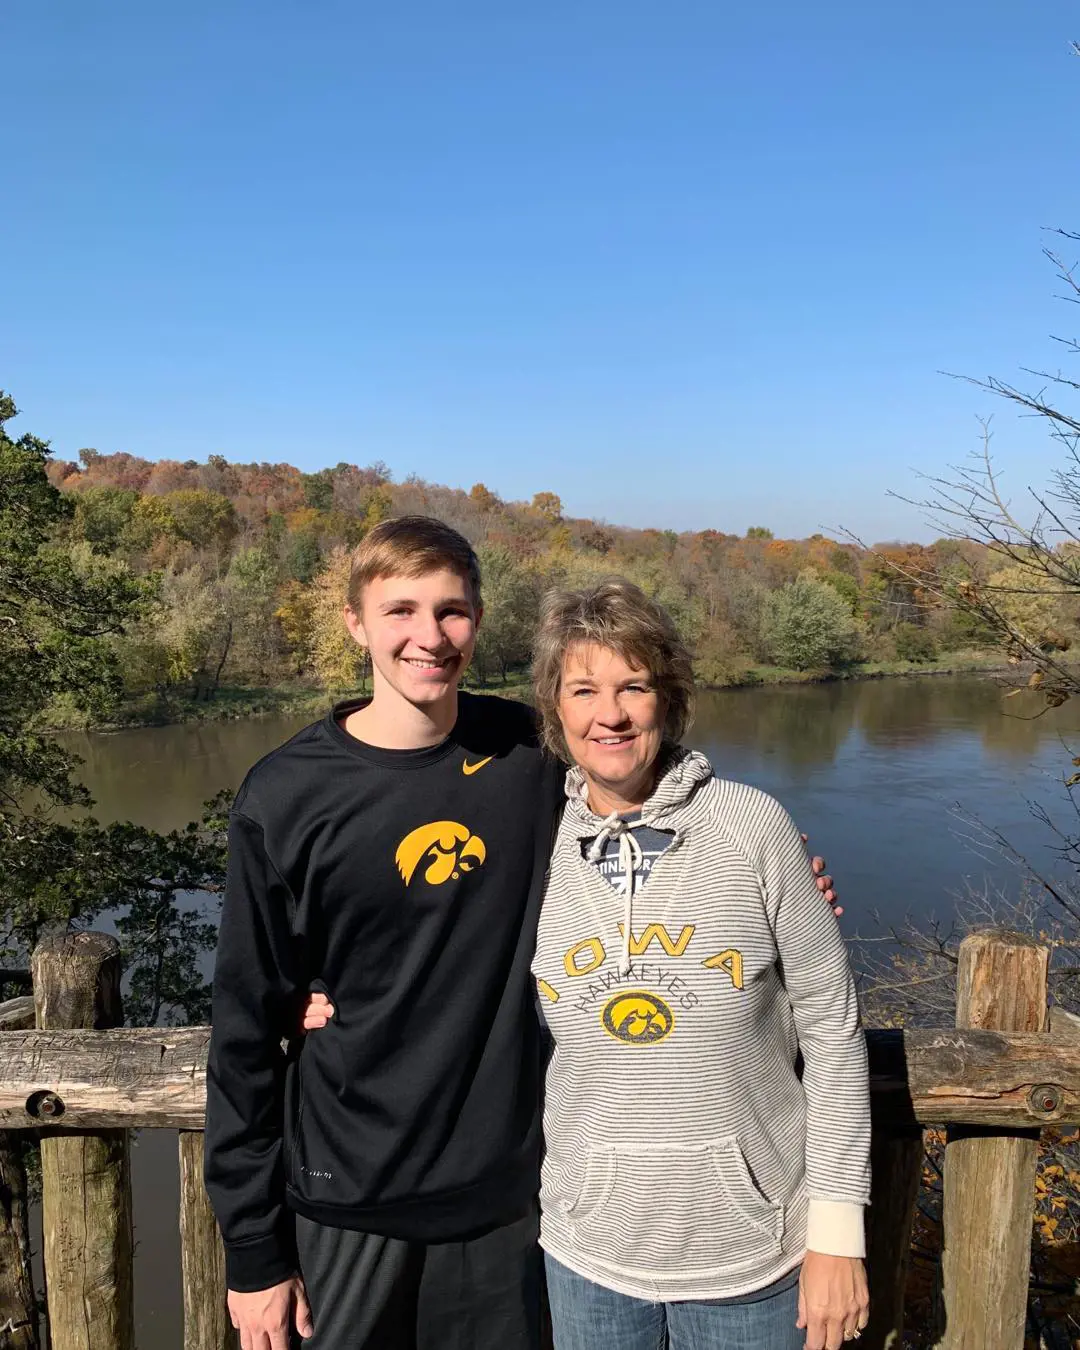 Lisa hiking in the beautiful nature if Iowa with David in October 2019